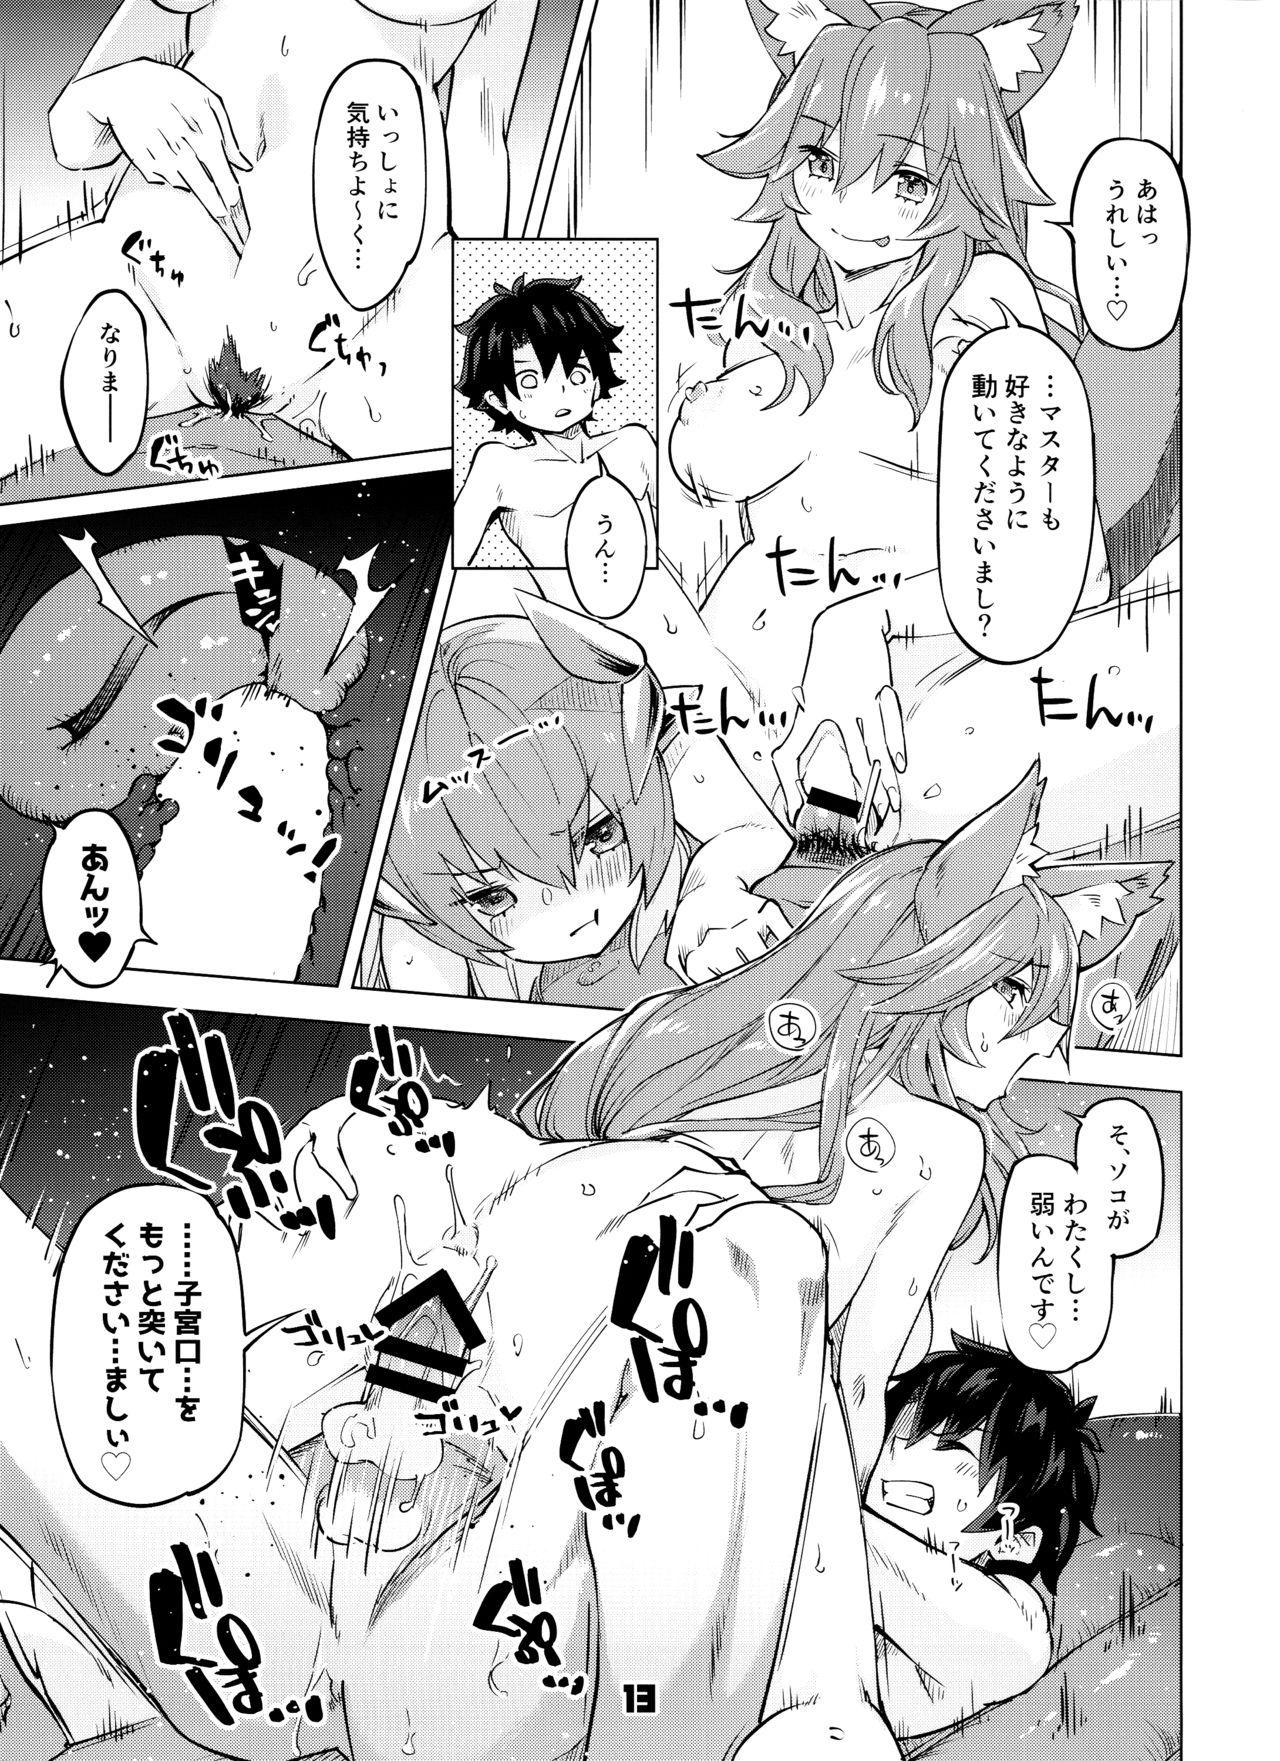 Nerd Sex Shinai to Derarenai My Room 2 - My room can not go out - Fate grand order Putaria - Page 12